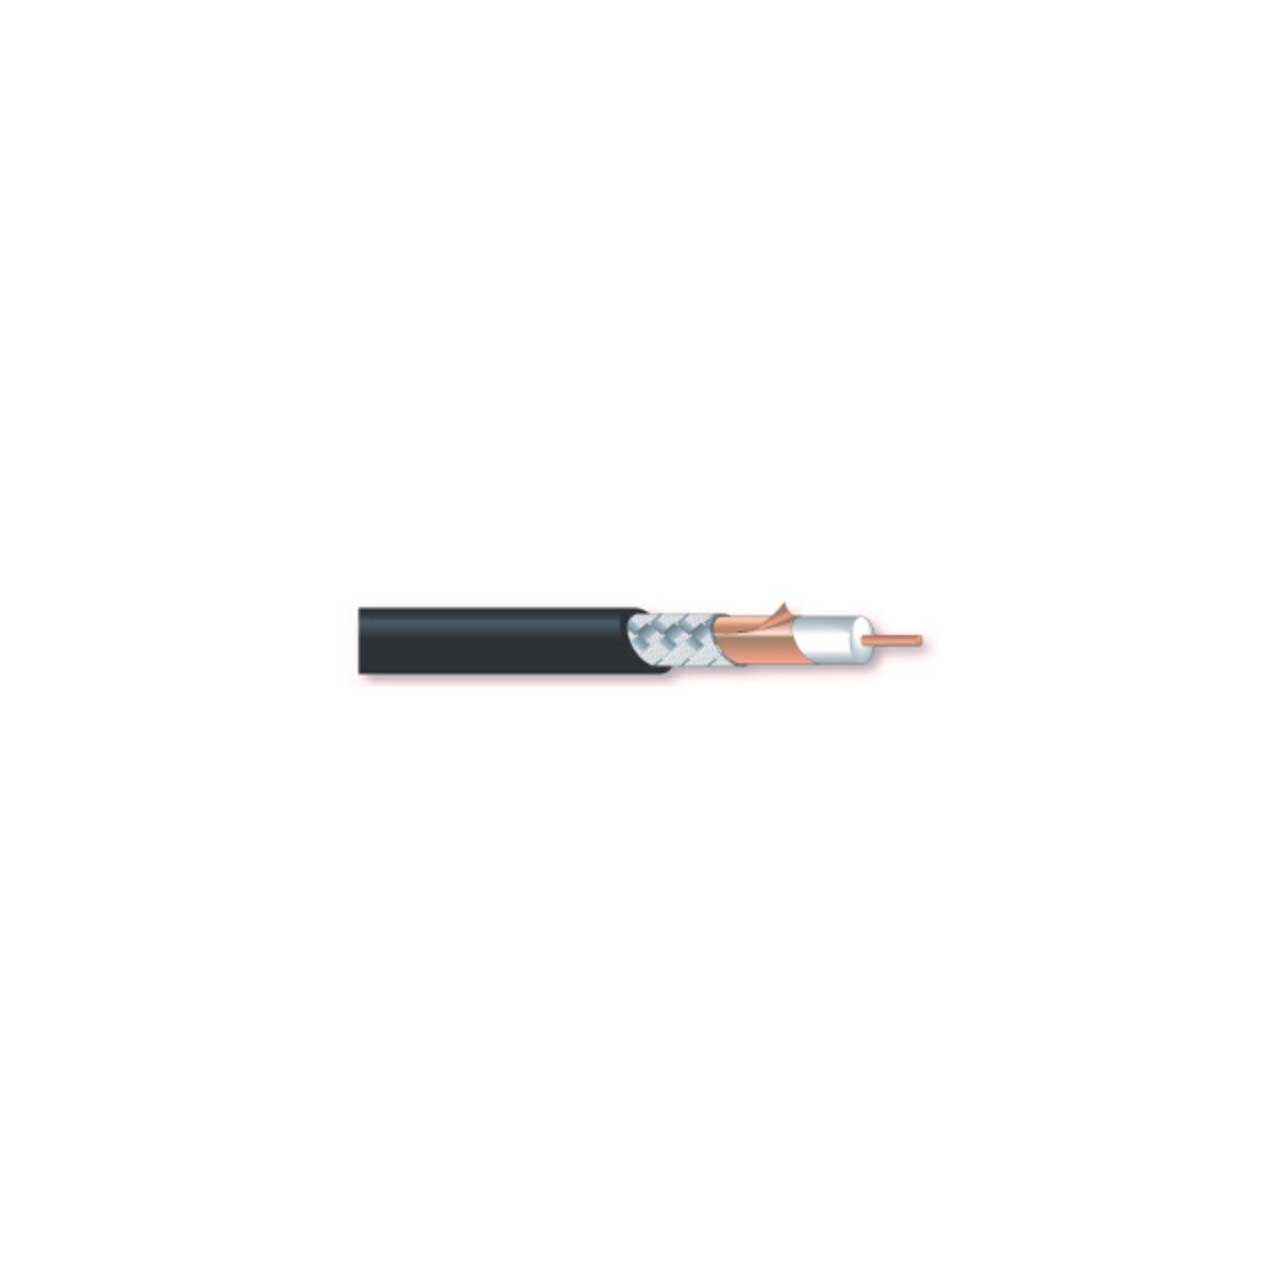 Canare L-3.3CUHD 656FT 75 Ohm Coaxial Cable for 12G-SDI - 656 Foot  L-33CUHD-656FT